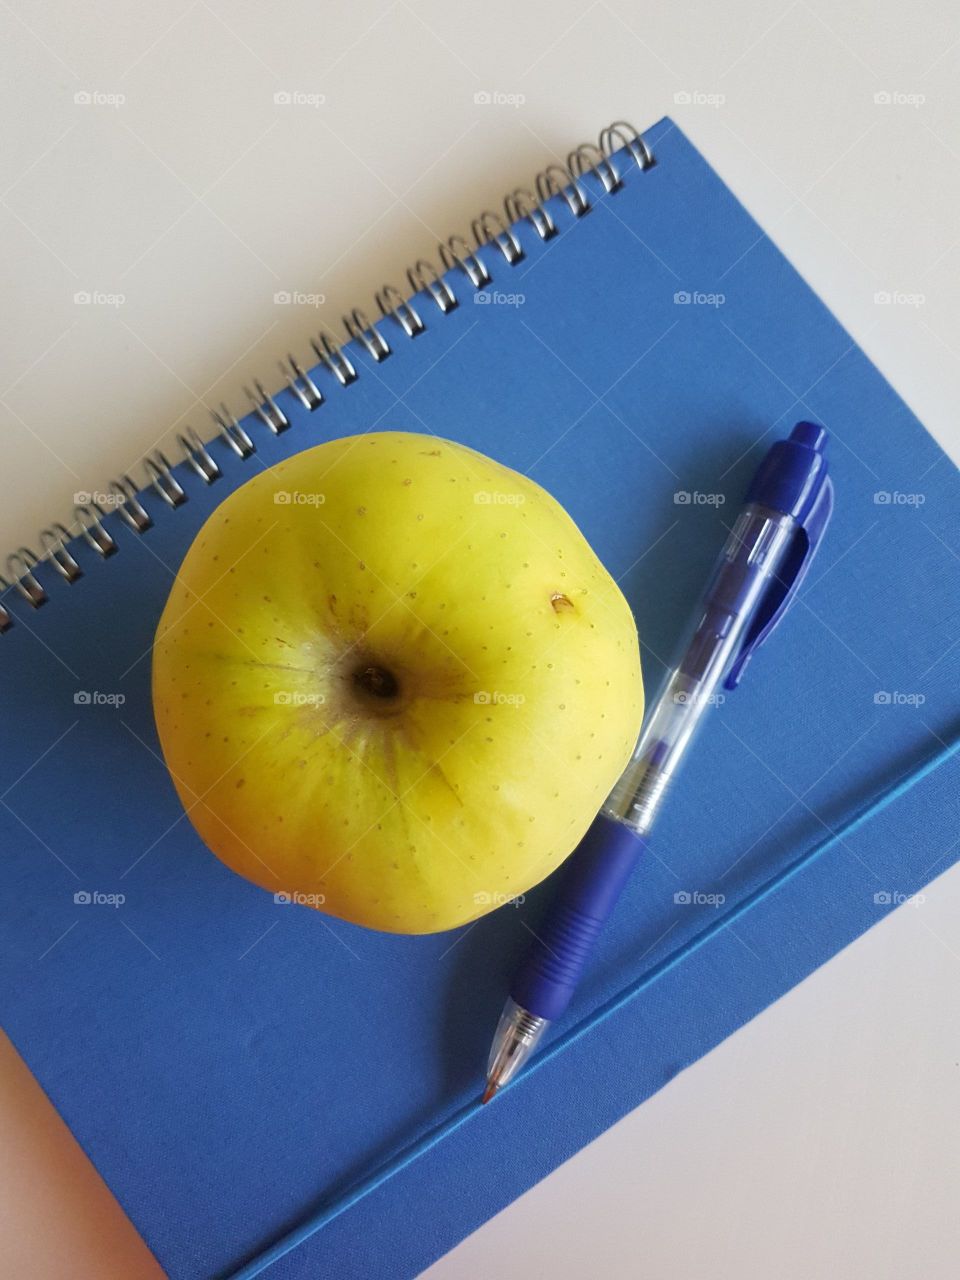 green apple on a notebook